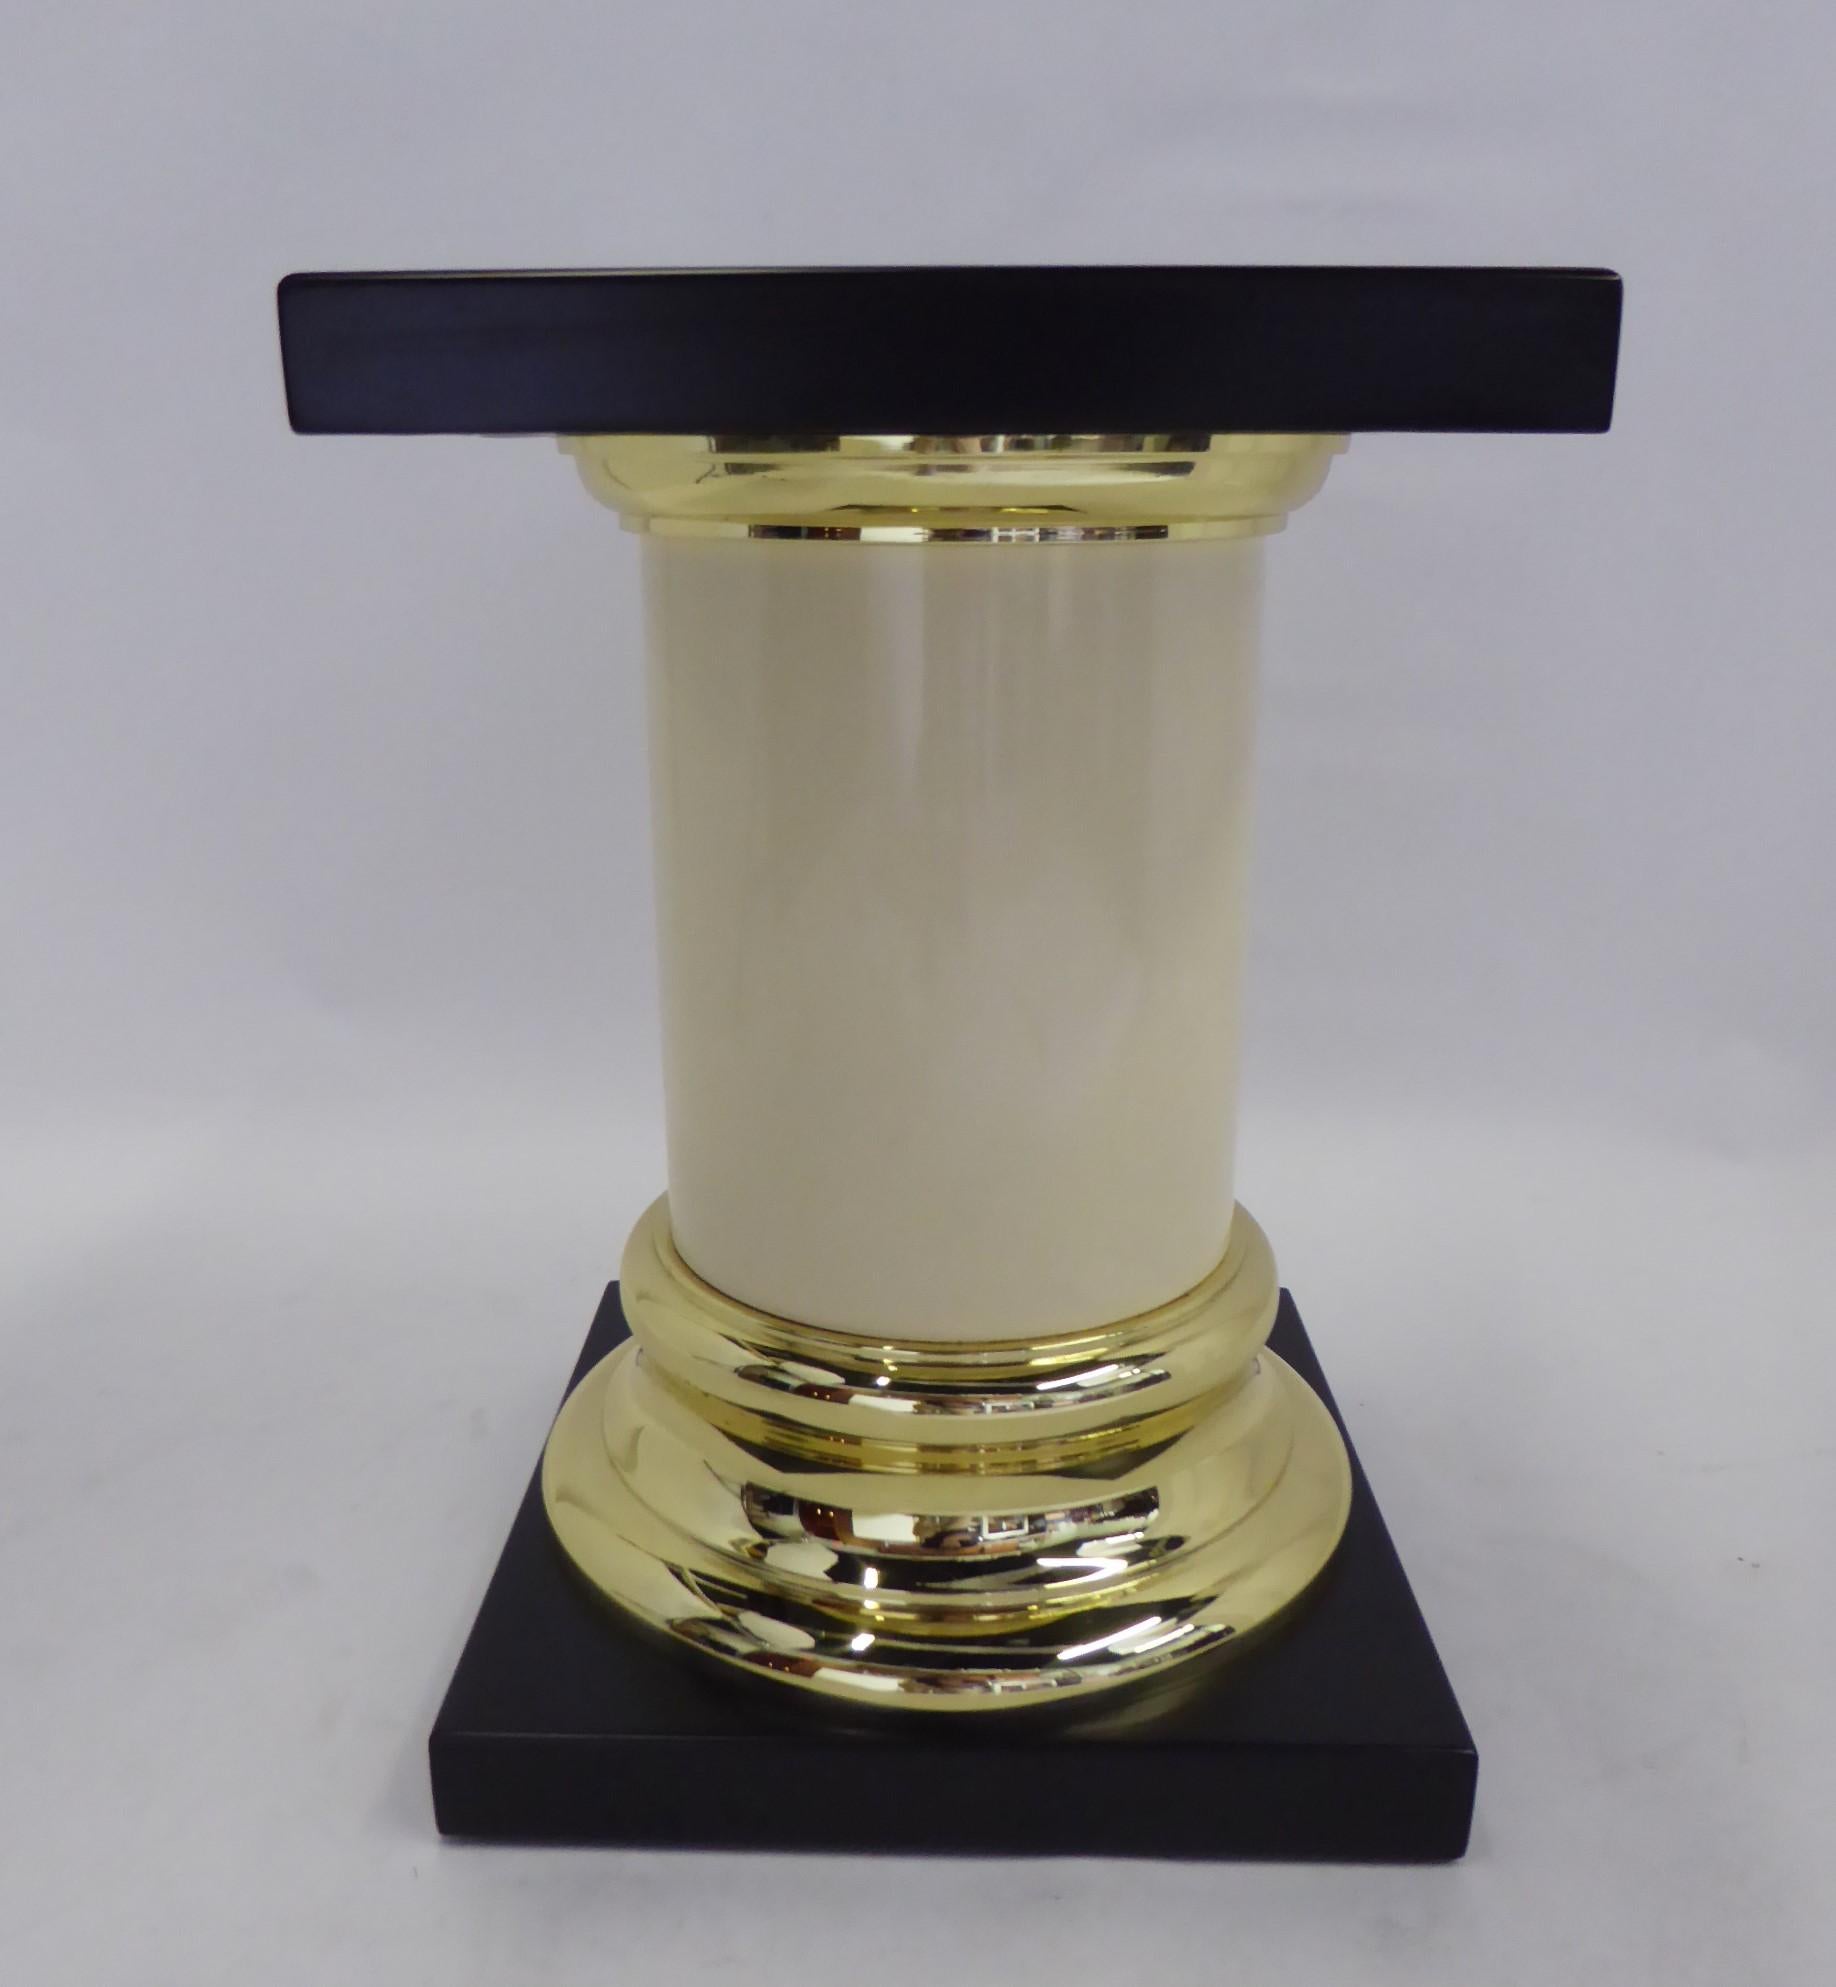 A Mid-Century Modern Mastercraft pedestal or side table with a simple Roman Tuscan column design. Featuring a smooth cylindrical ivory colored resin (or ABS plastic) shaft with solid brass capital and base terminating on both ends in a satin black